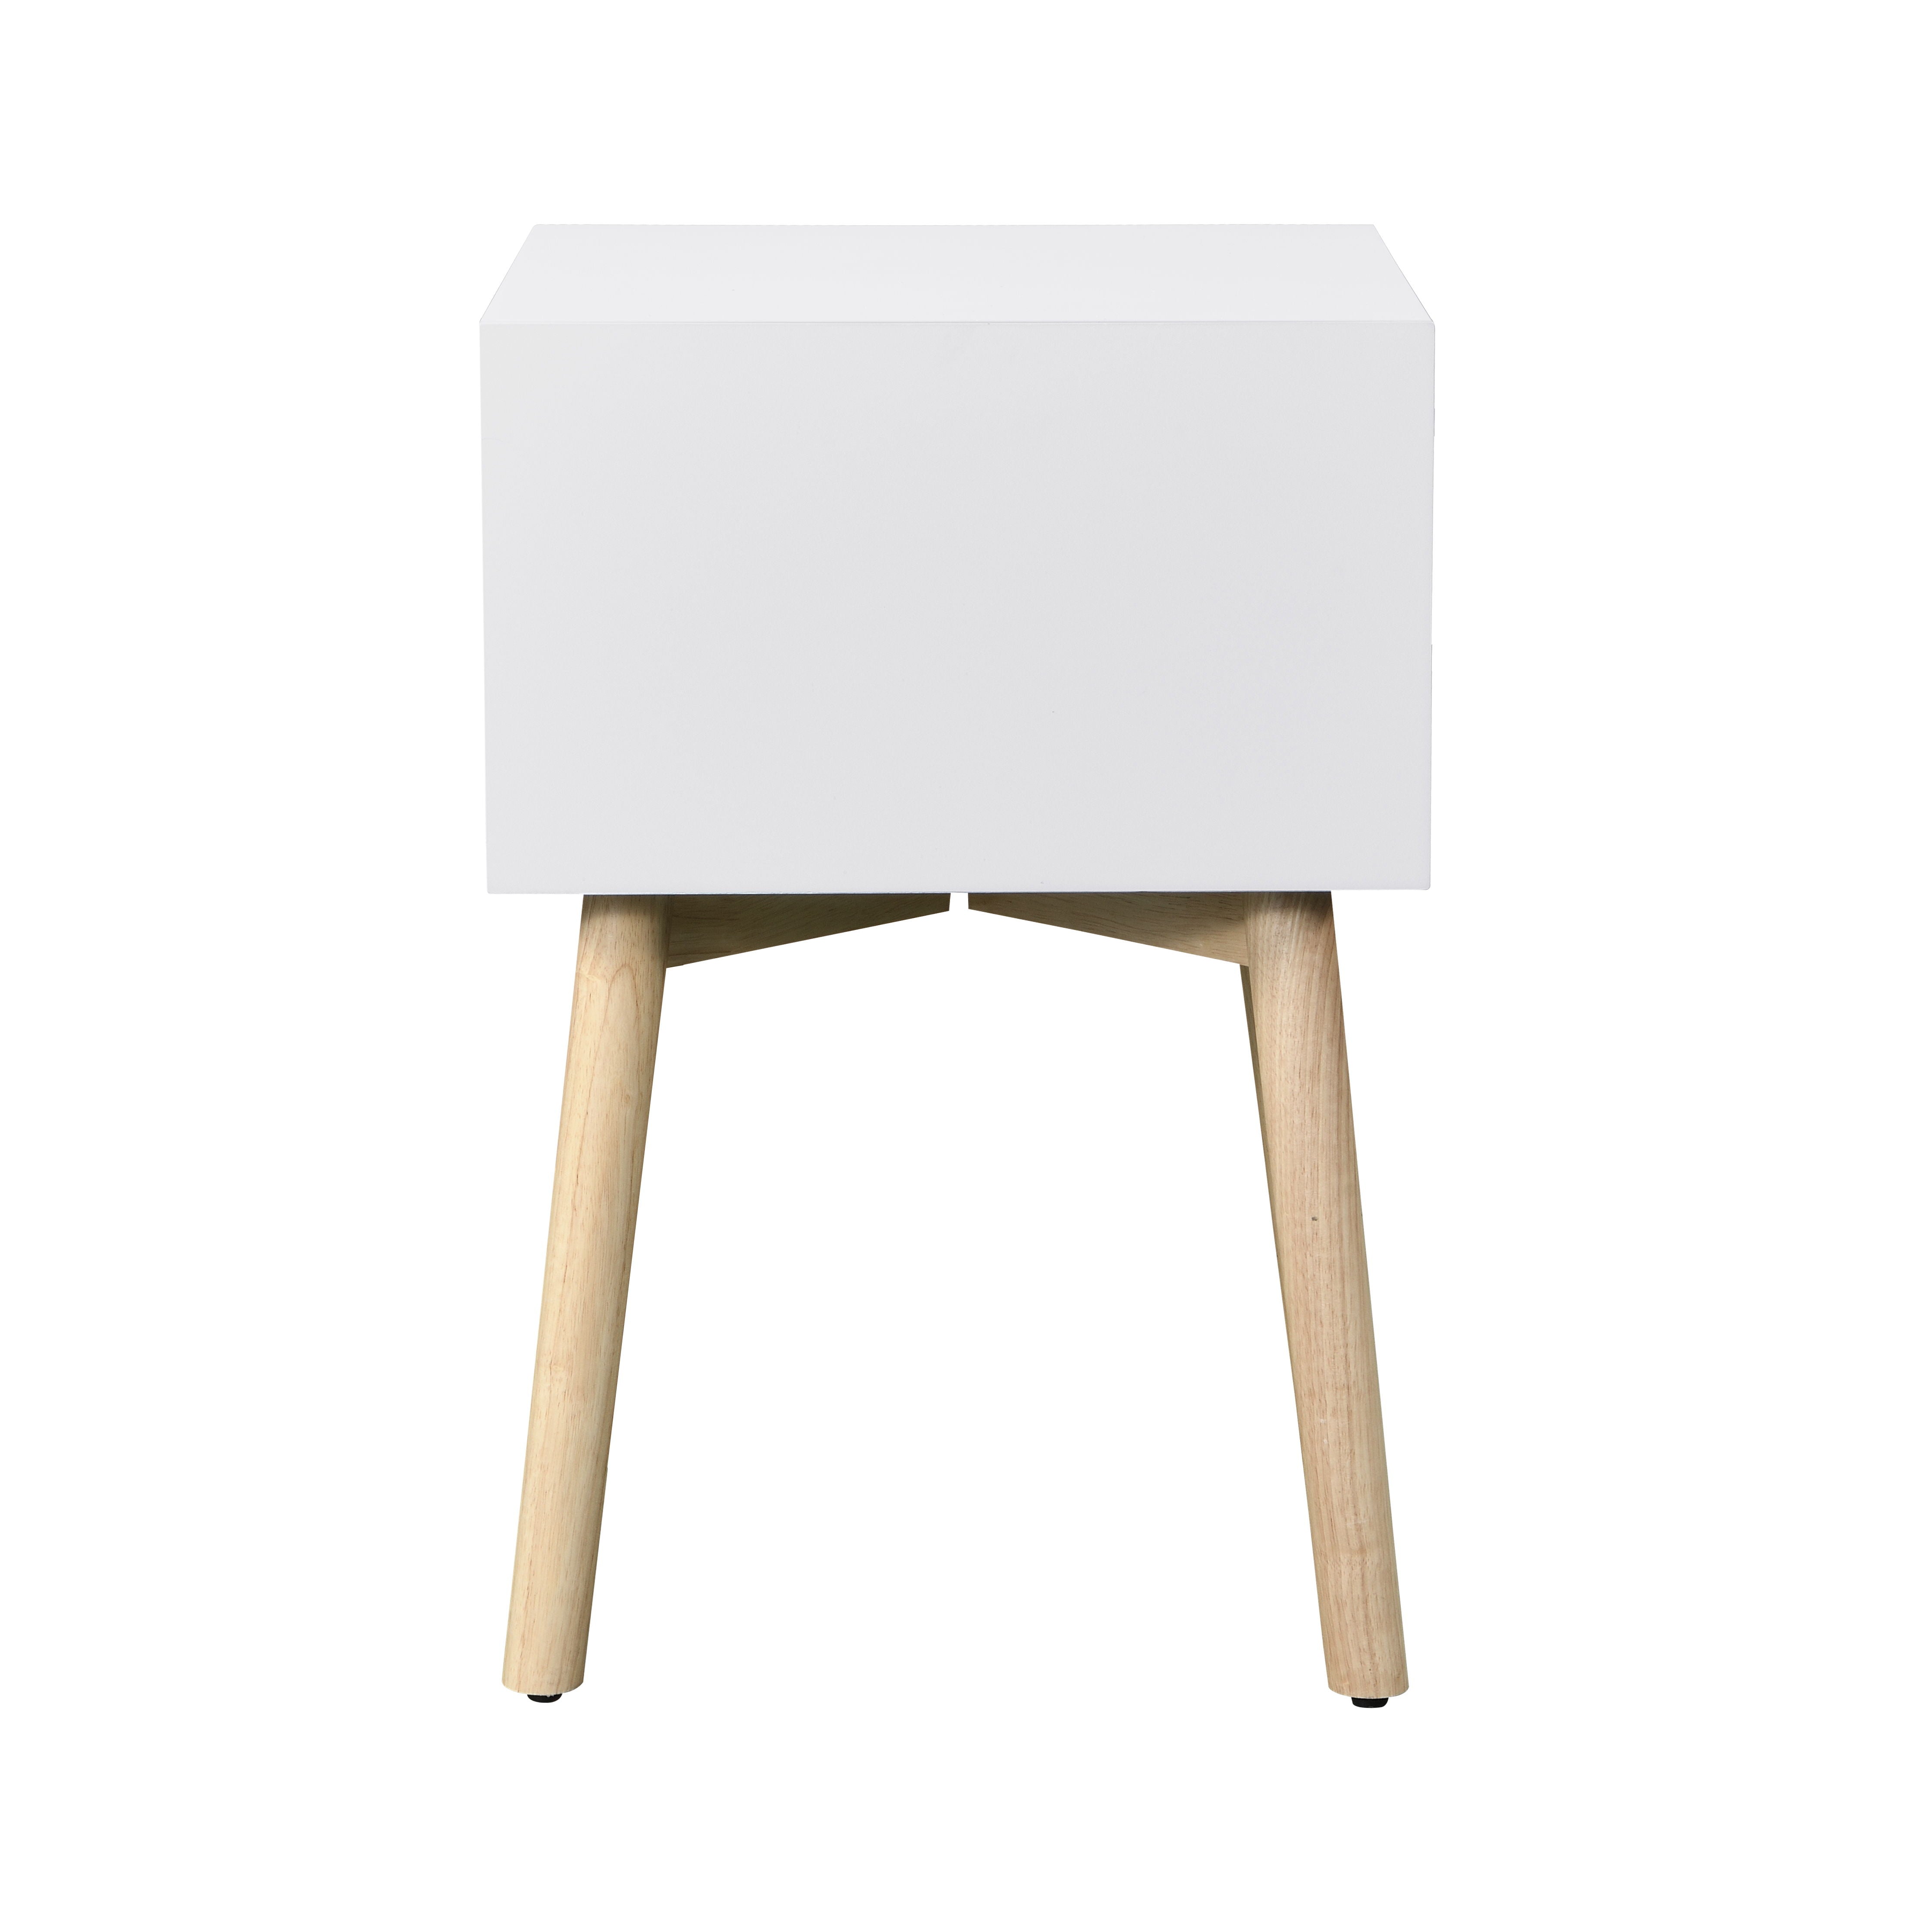 Zfztimber Side Table, Bedside Table With 2 Drawers And Rubber Wood Legs, Mid - Century Modern Storage Cabinet For Bedroom - White